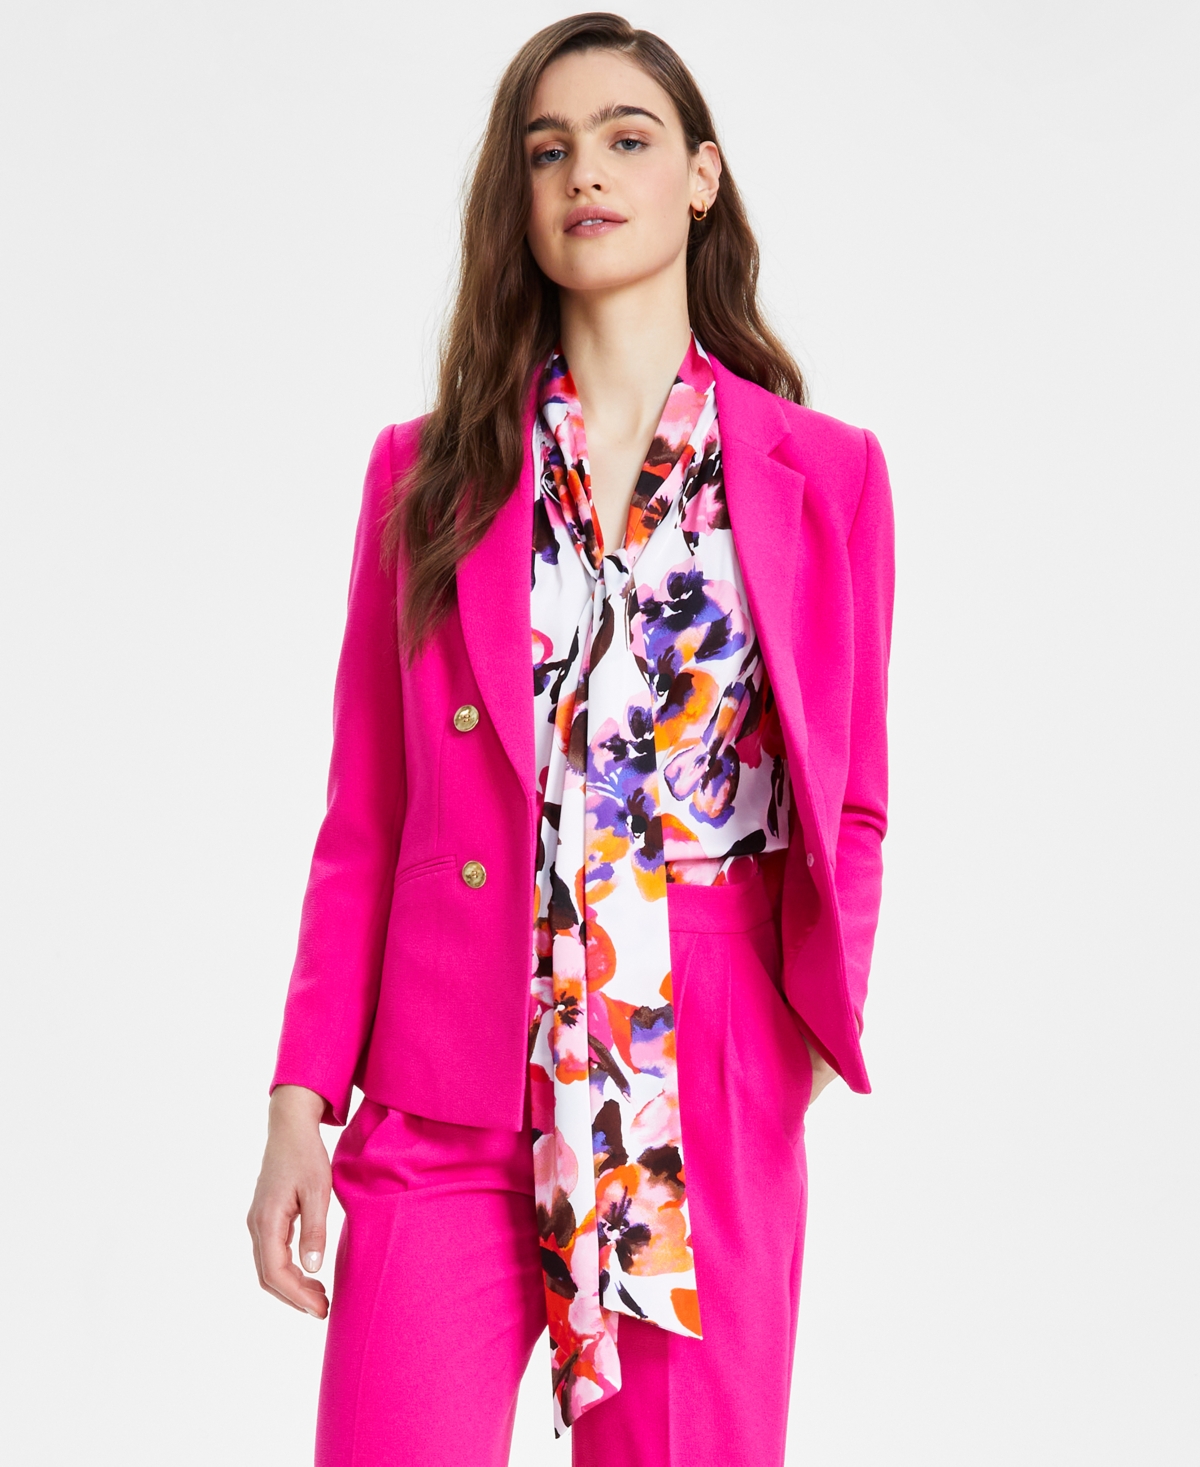 Women's Textured Open-Front Button-Trim Blazer, Created for Macy's - Sunset Rose